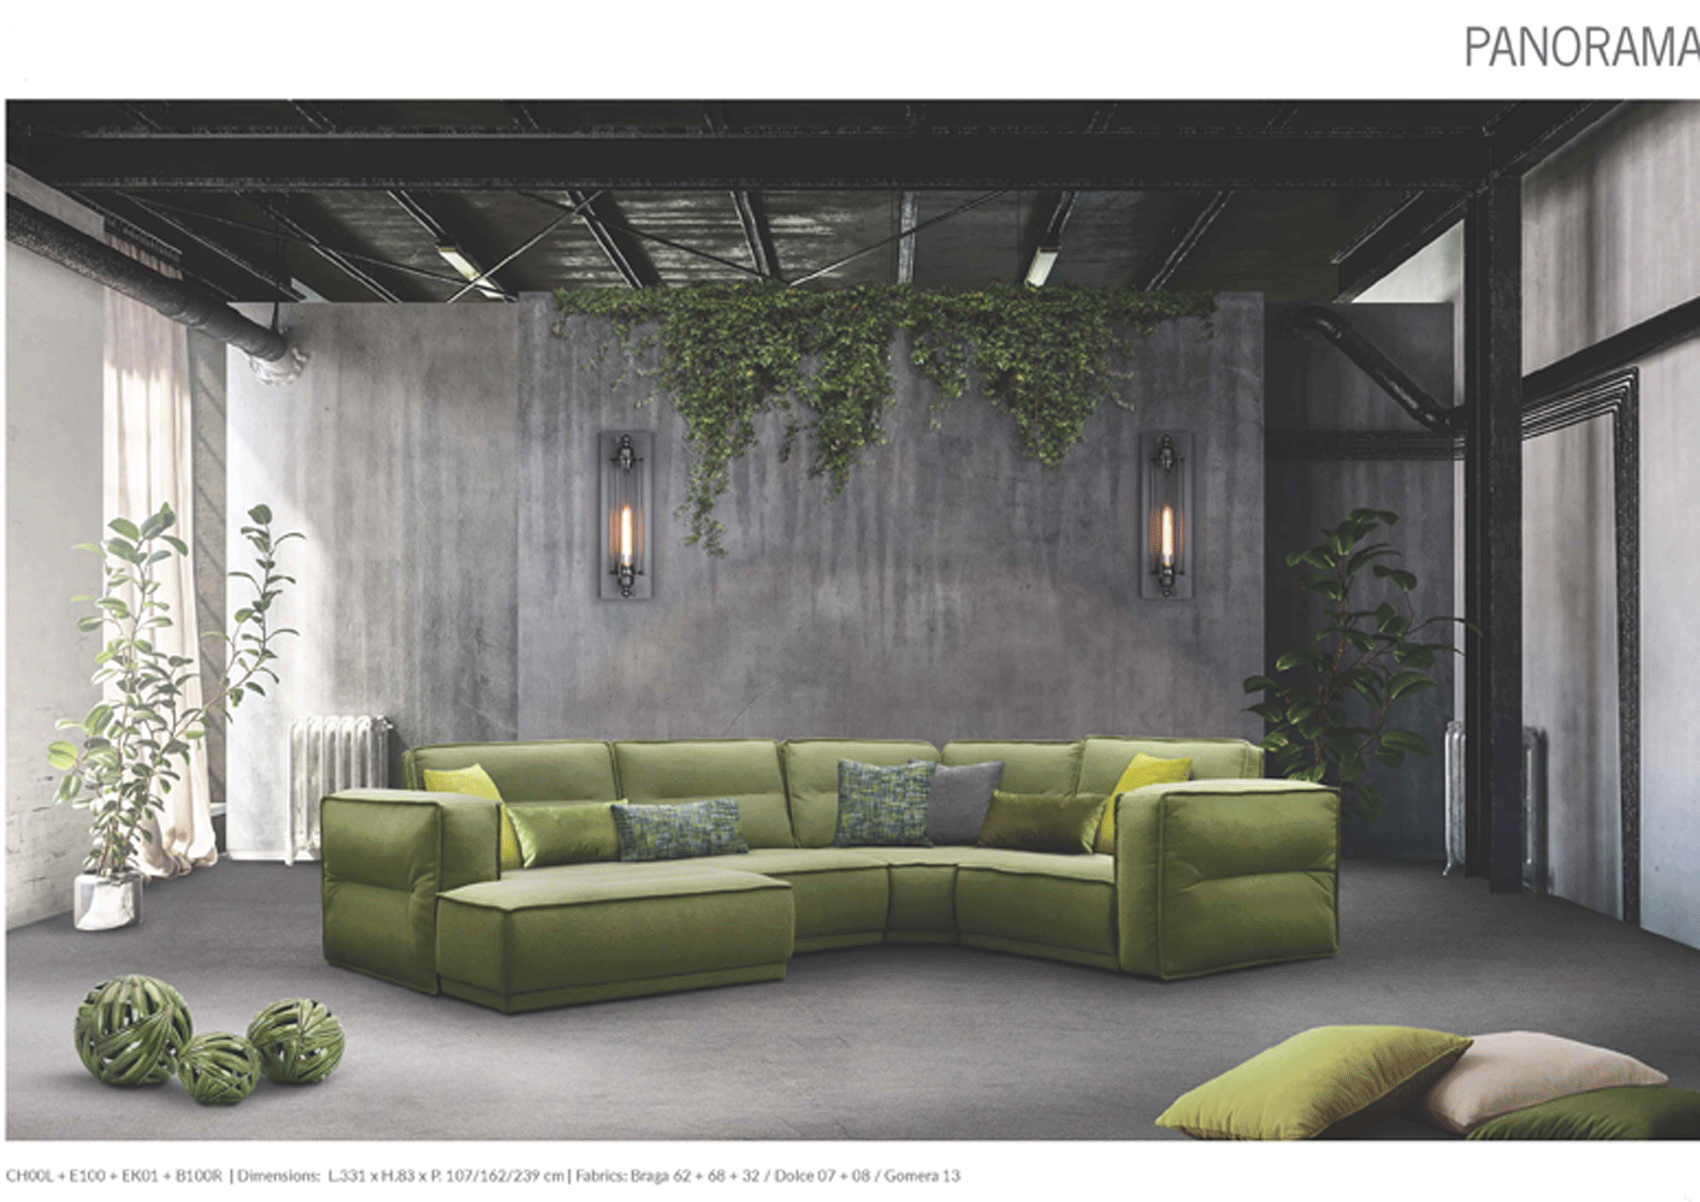 Brands European Living Collection Panorama Sectional